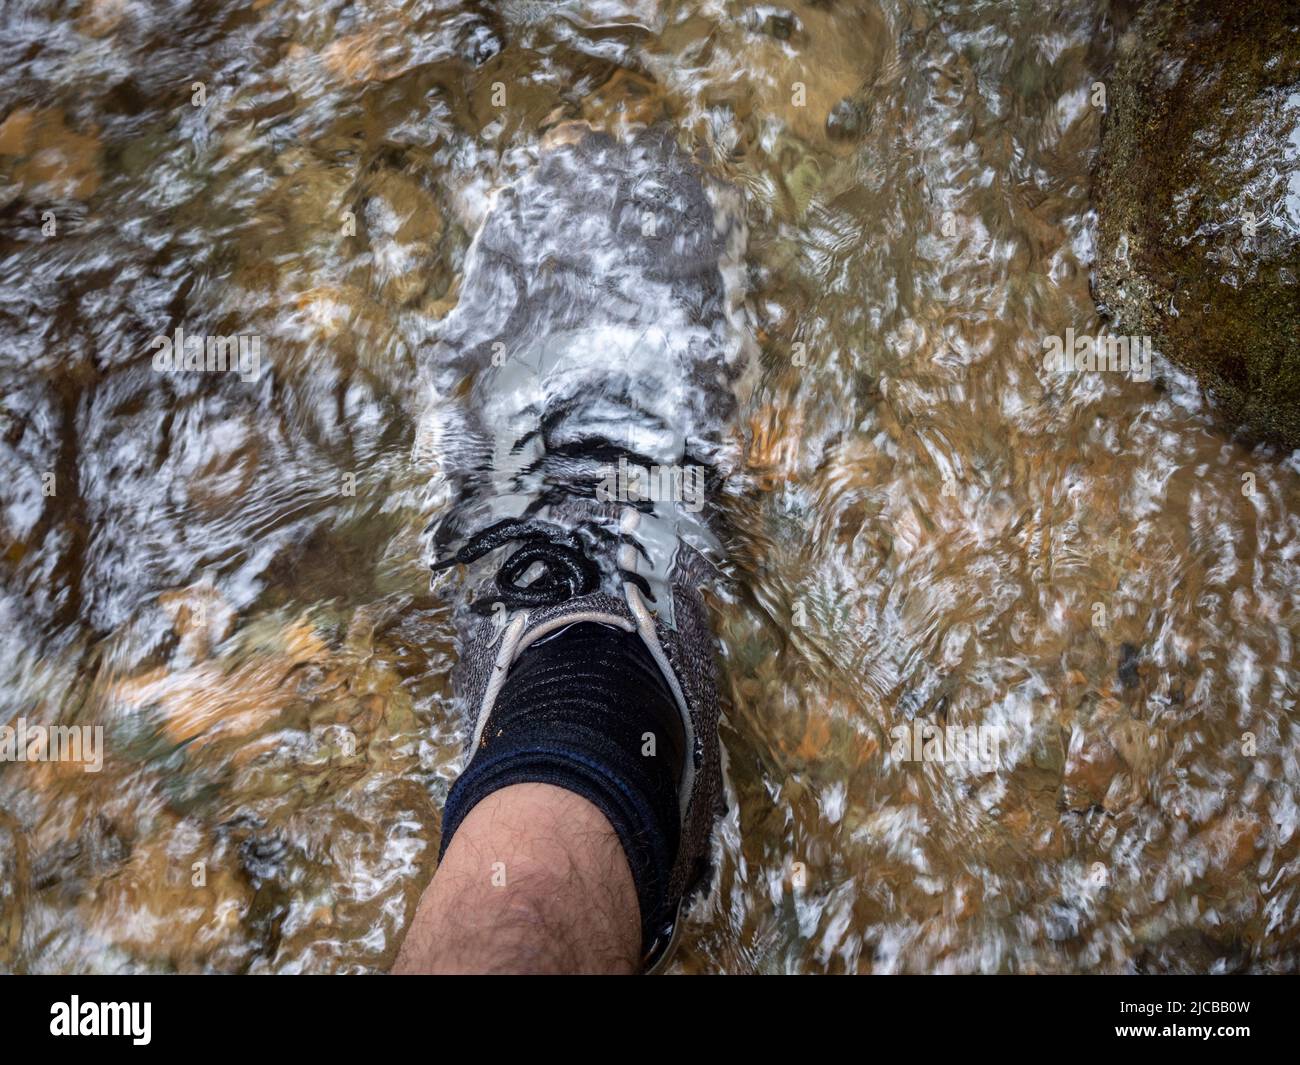 Foot with Black Socks and Grey Hiking Shoes in the River Water Stock Photo